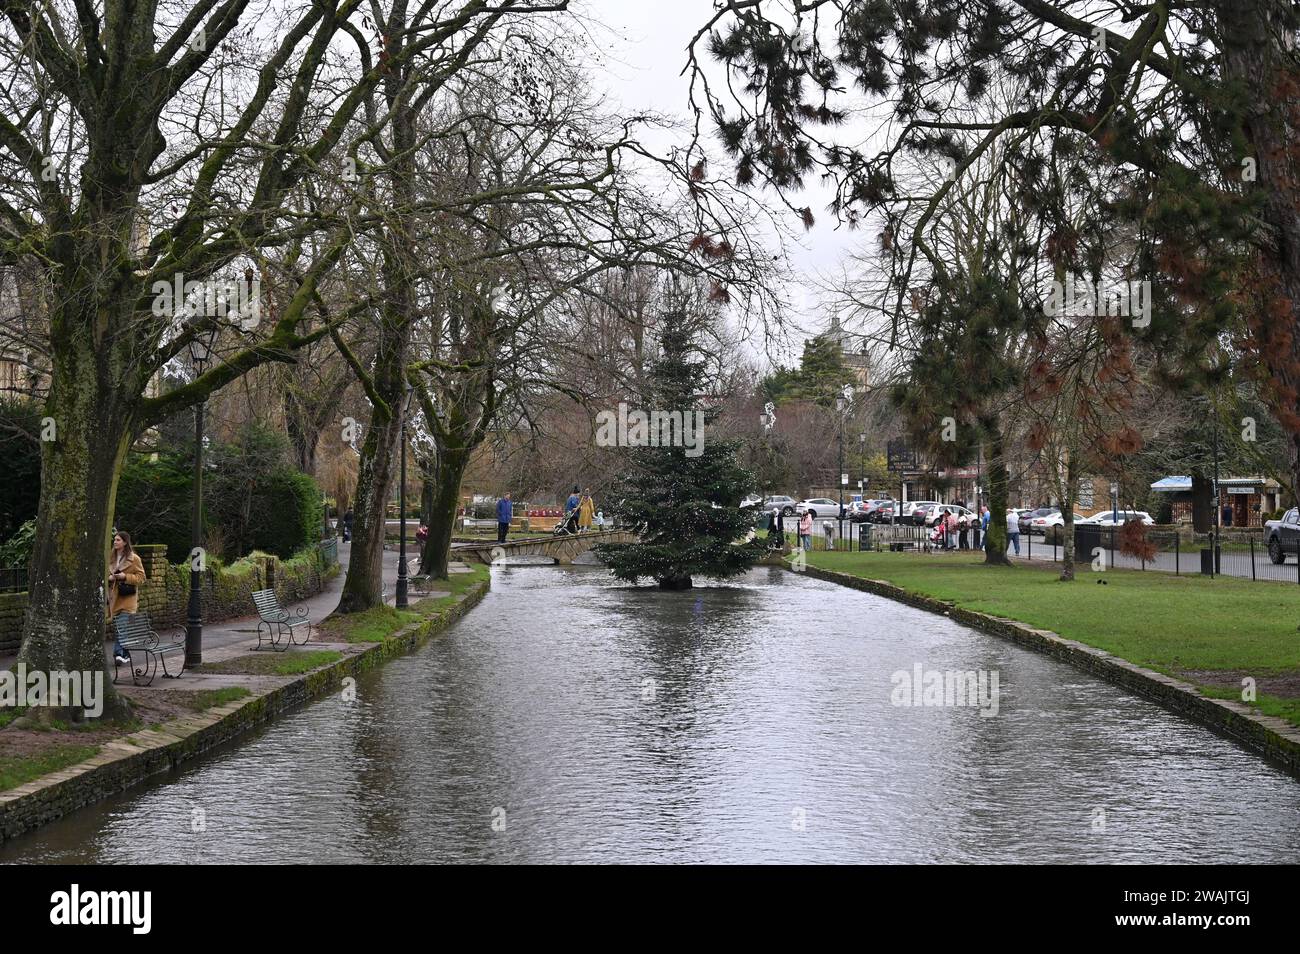 The Christmas tree in the Cotswold village of Bourton on the Water stands in the middle of the River Windrush as it flows through the village Stock Photo